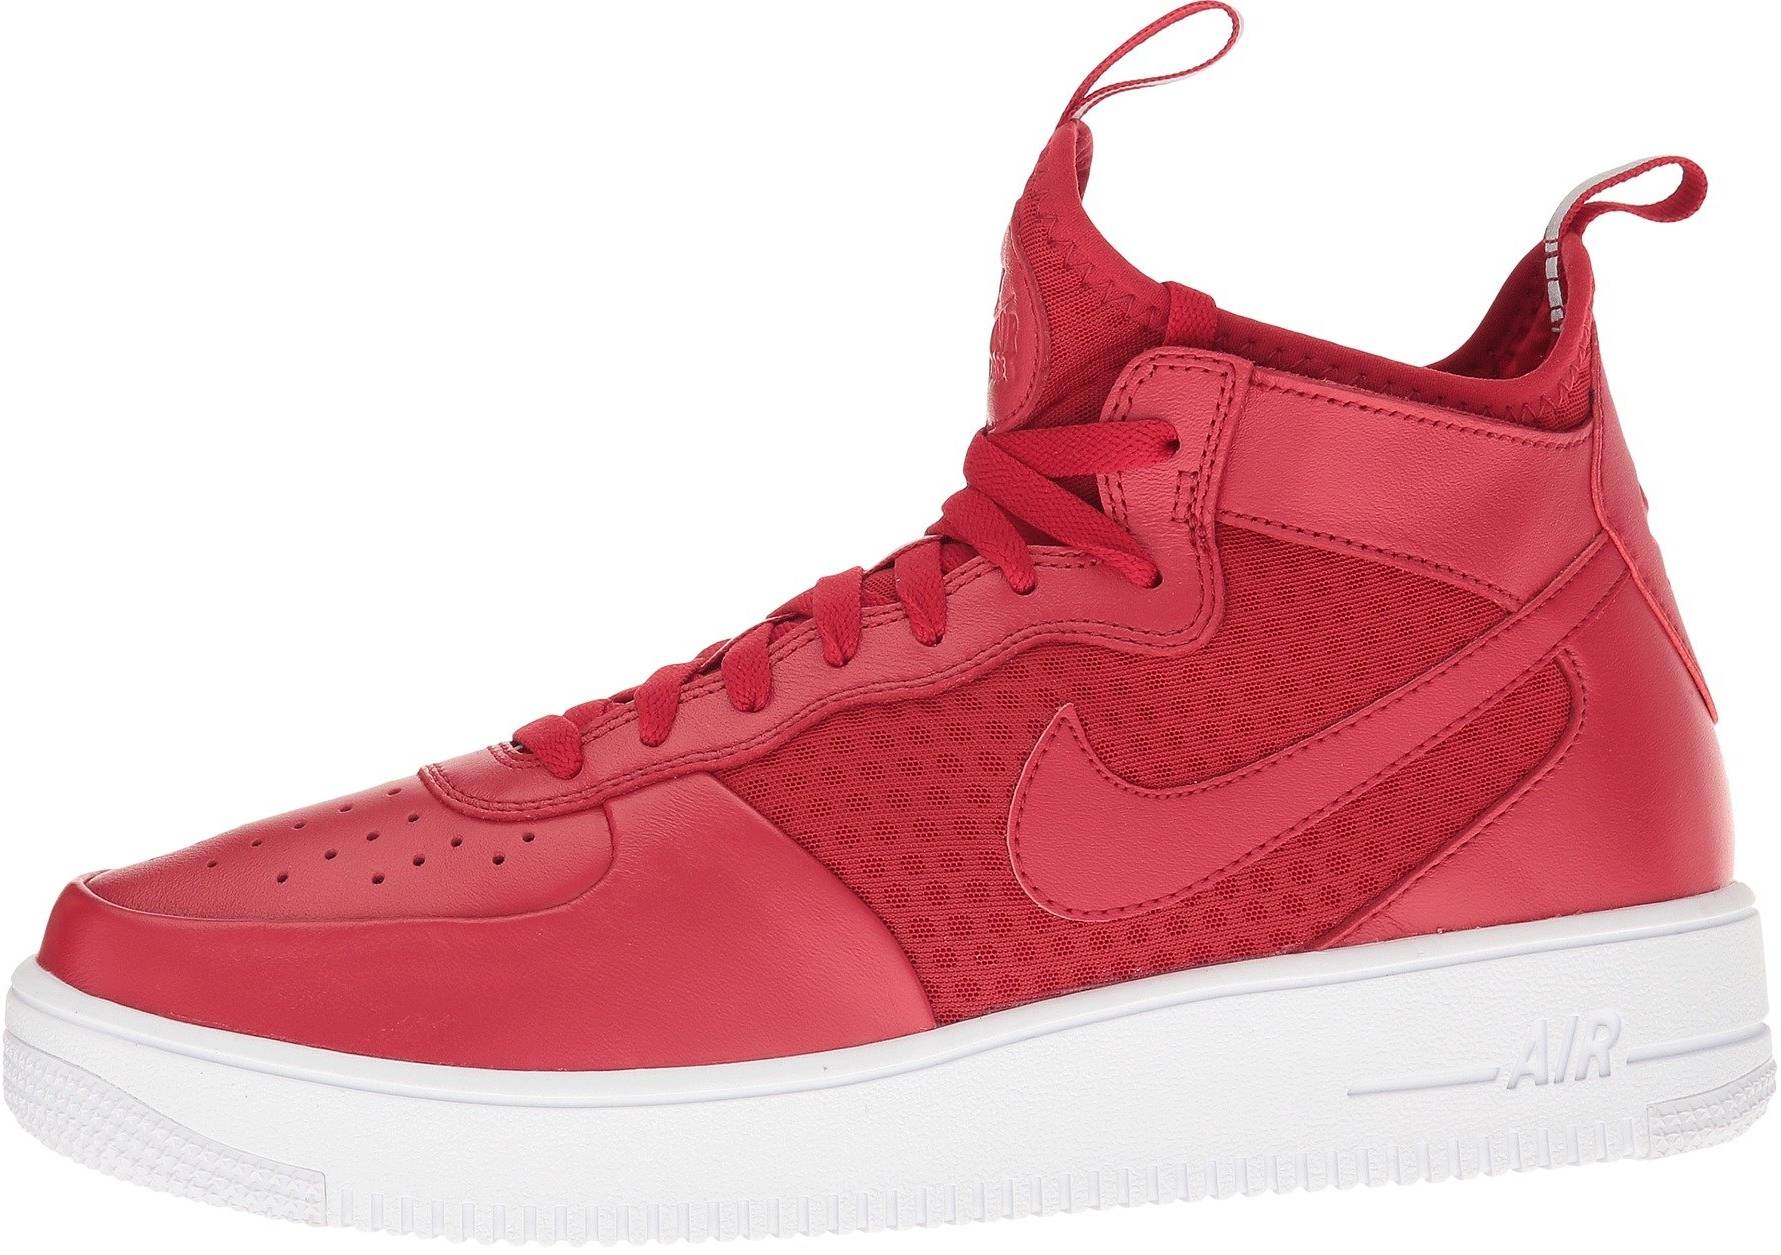 9 Reasons to/NOT to Buy Nike Air Force 1 UltraForce Mid (Sep 2021 ...